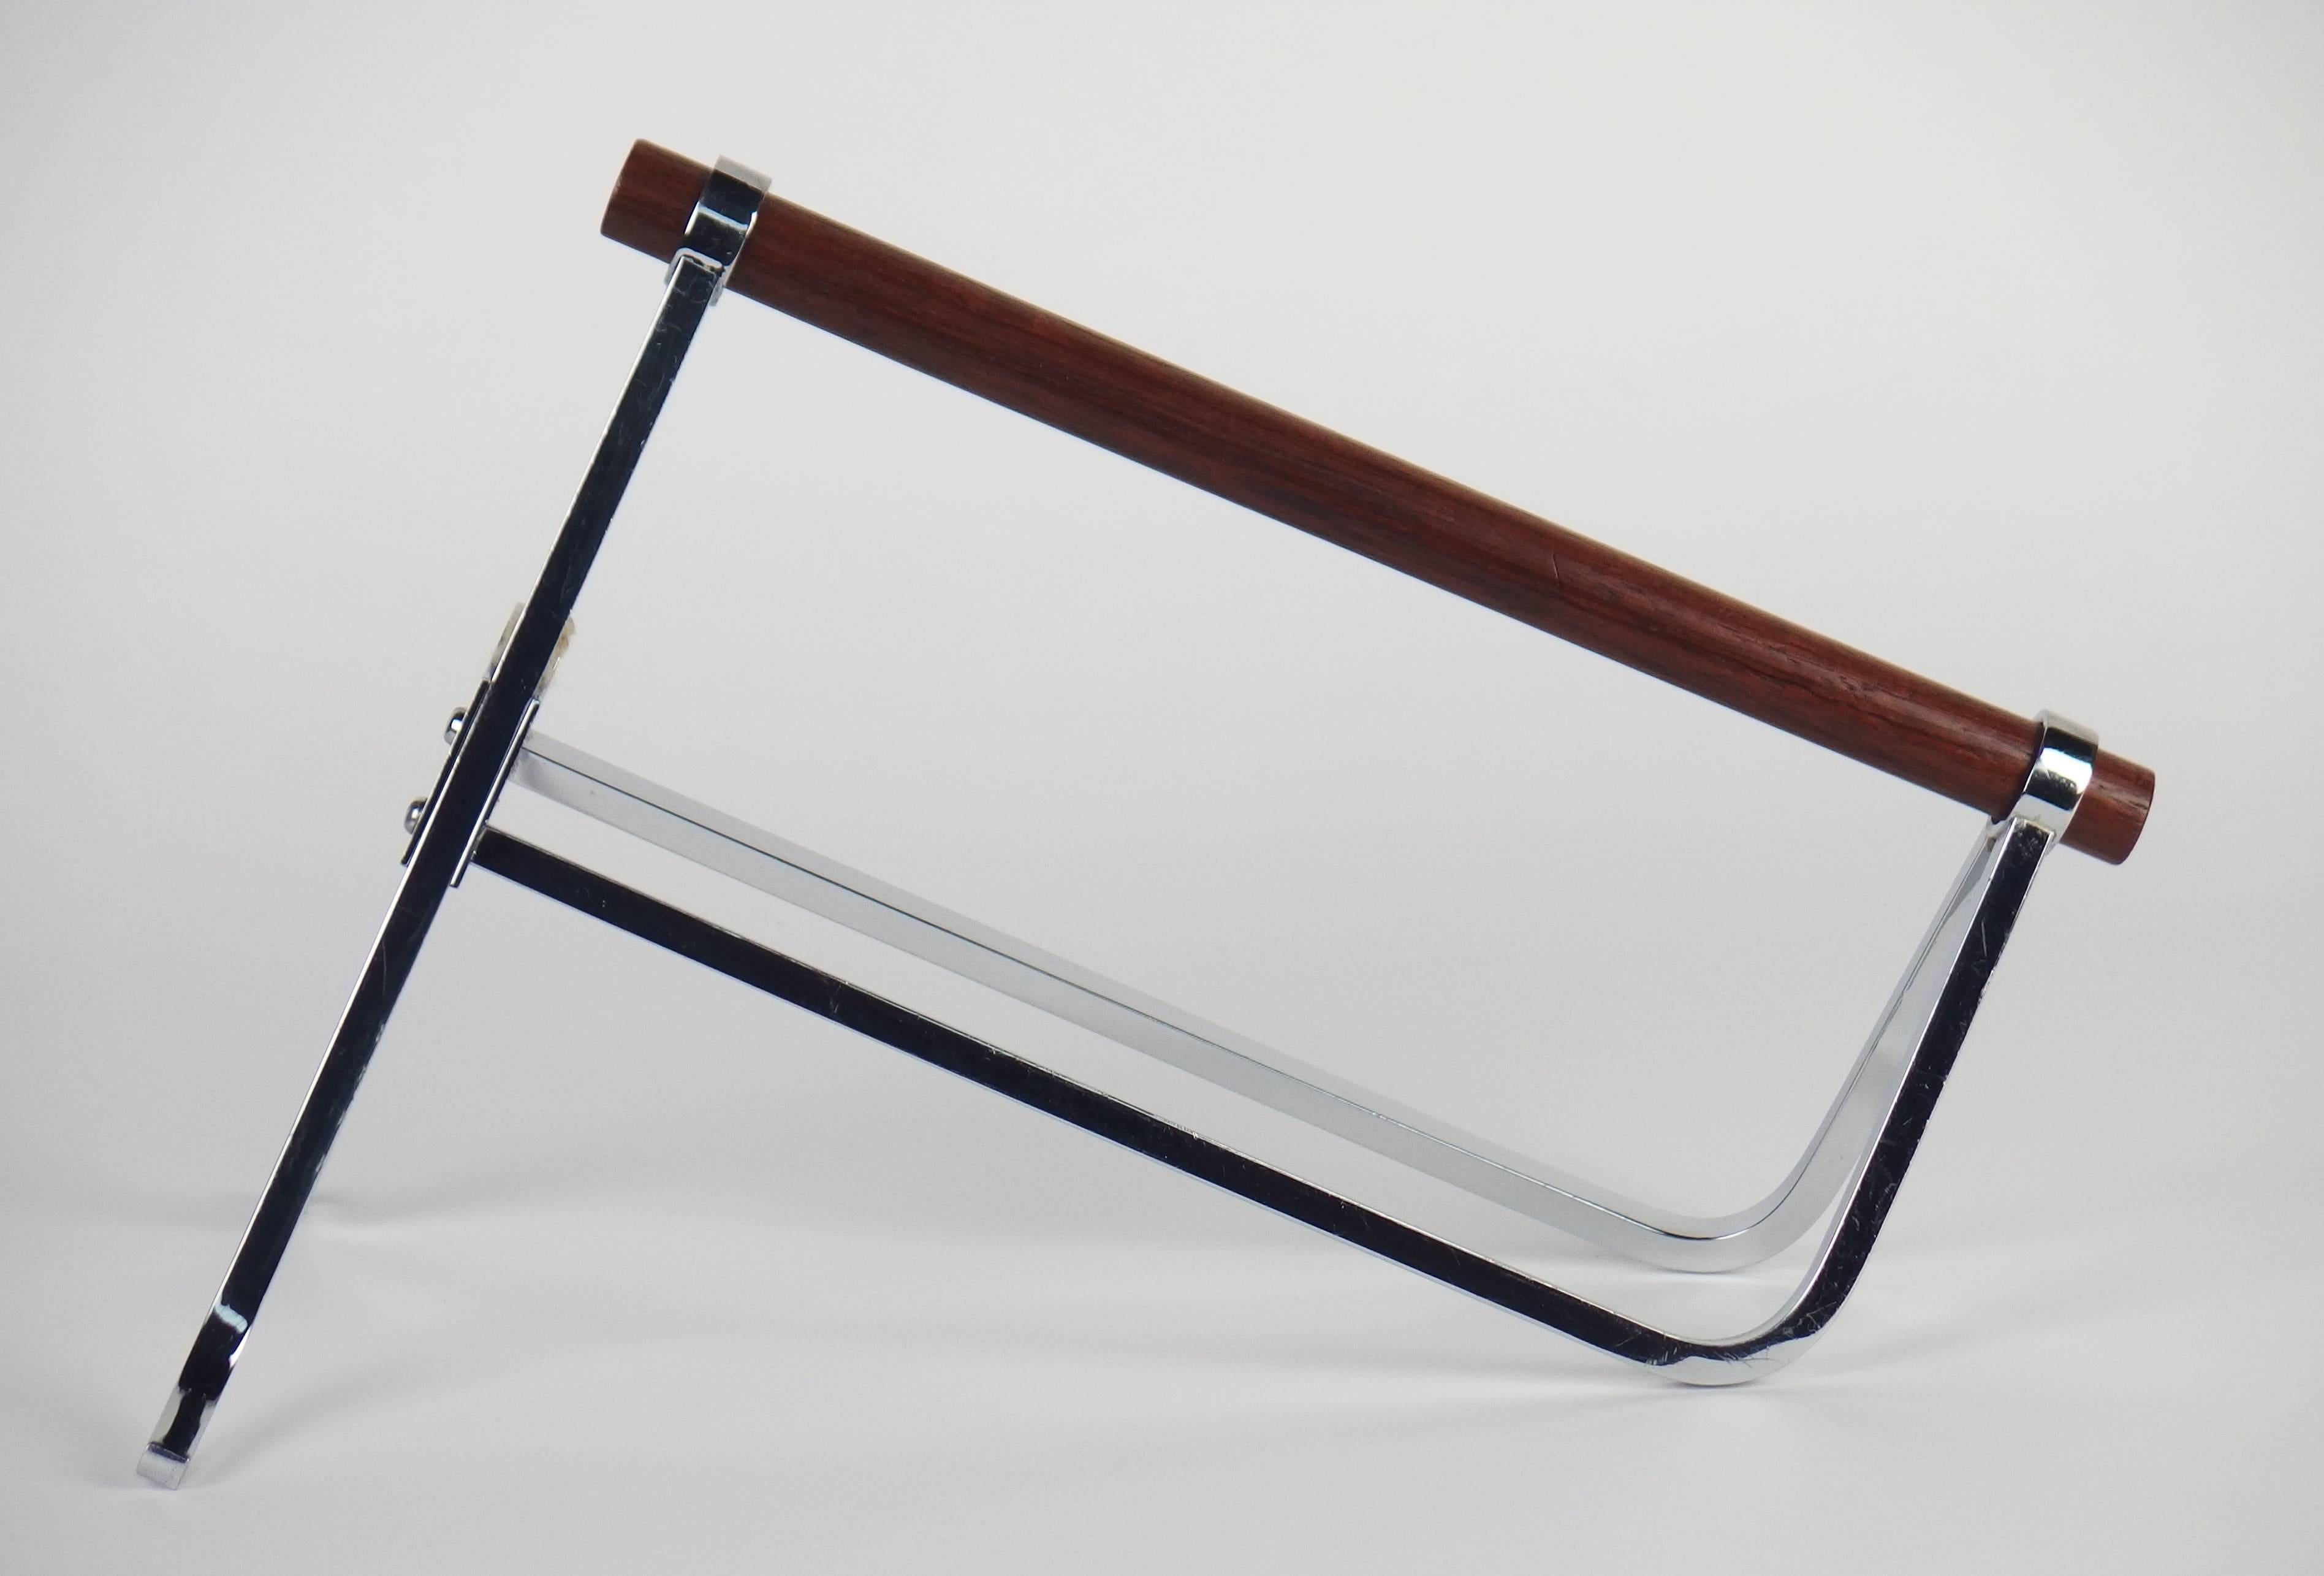 A chromed metal server with a mahogany handle. Modernist design by Jacques Adnet. Made in France mark on the bottom.